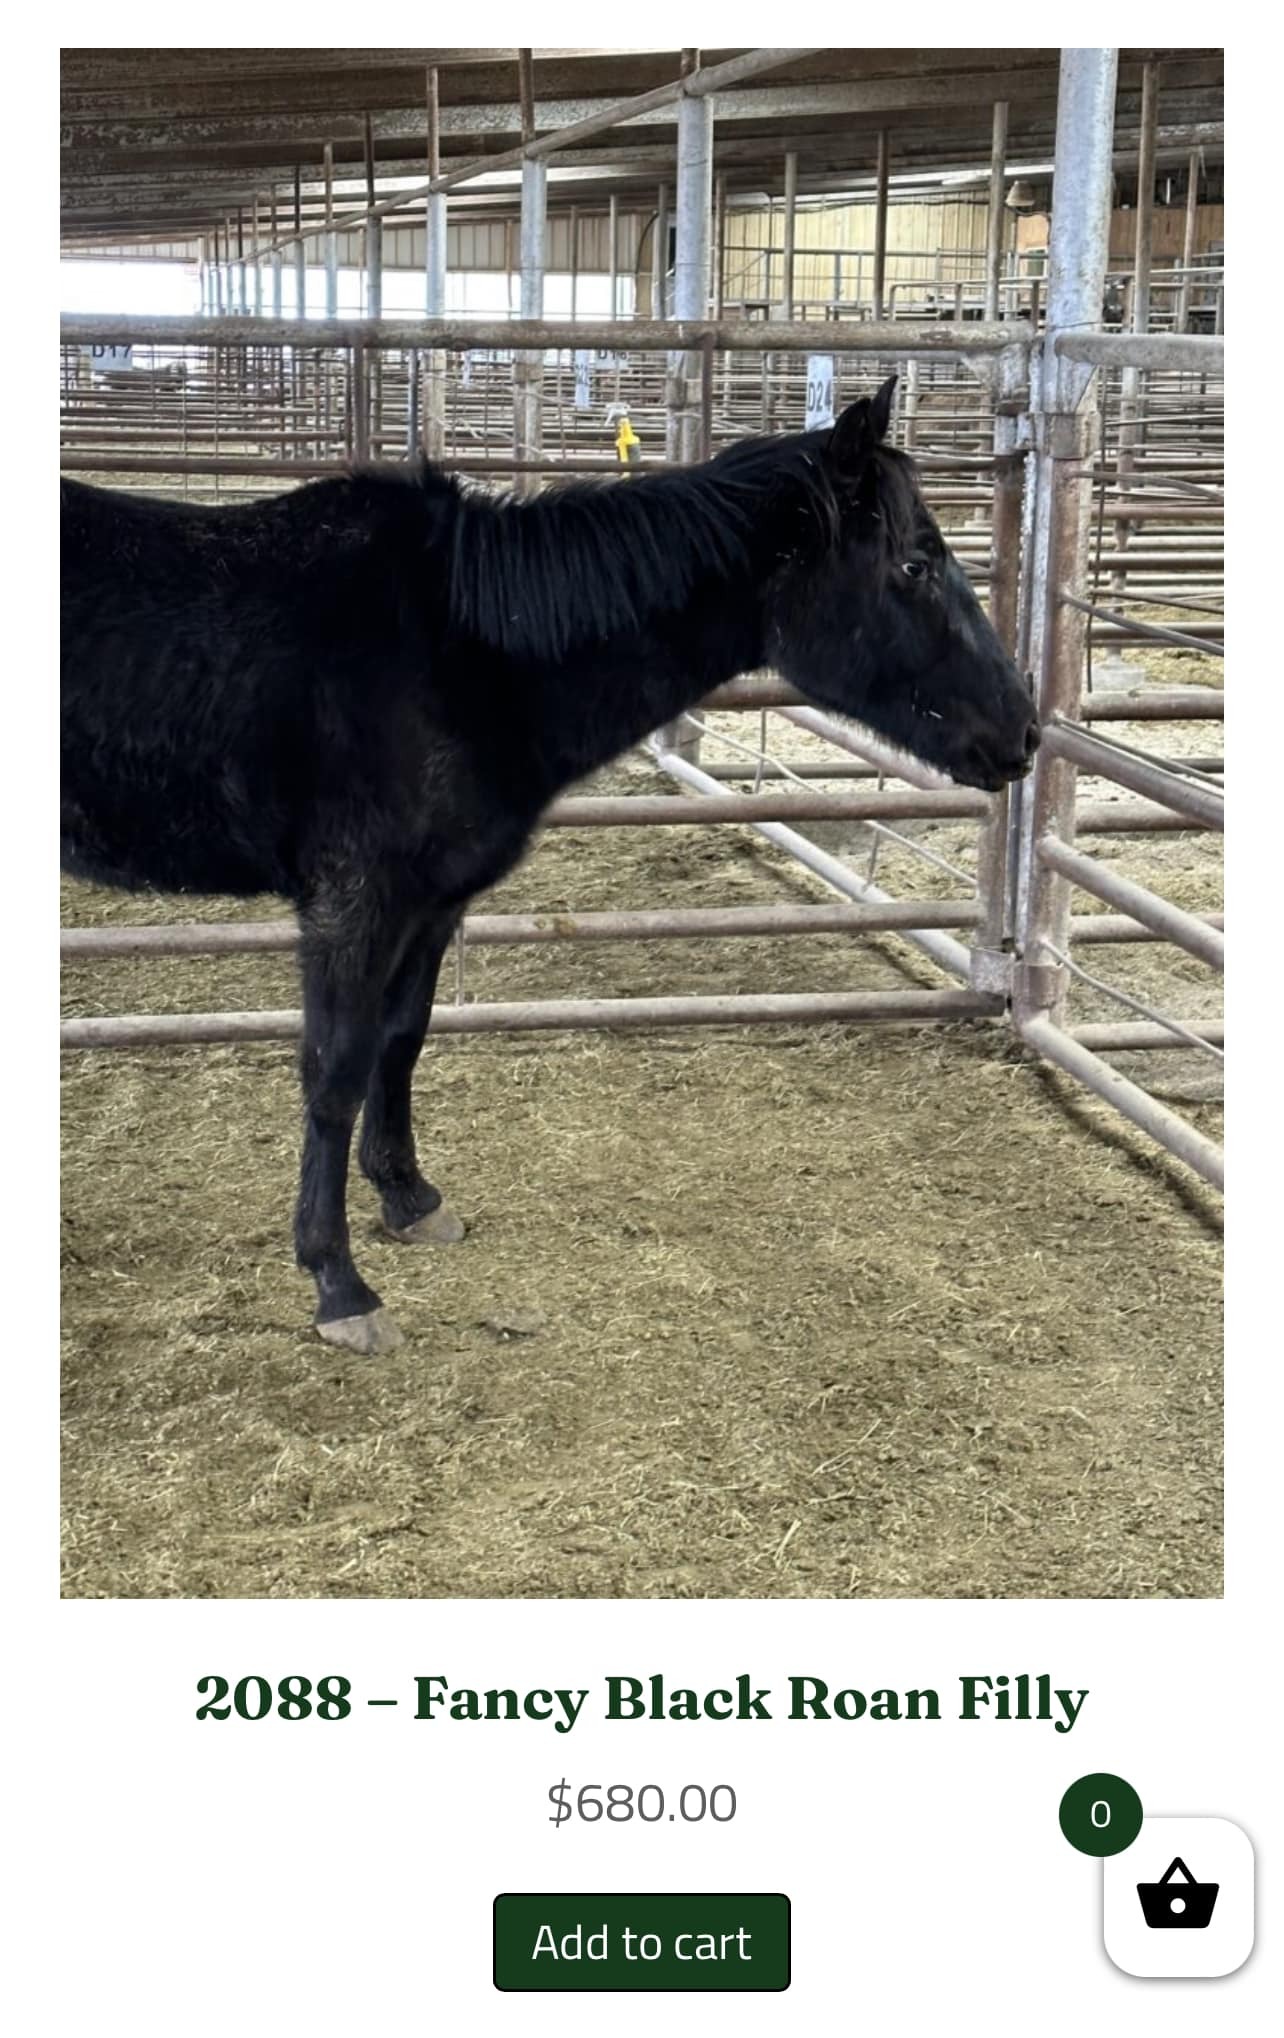 fucked up tumblr horses - -  - Ya 2088 Fancy Black Roan Filly $680.00 Add to cart 0